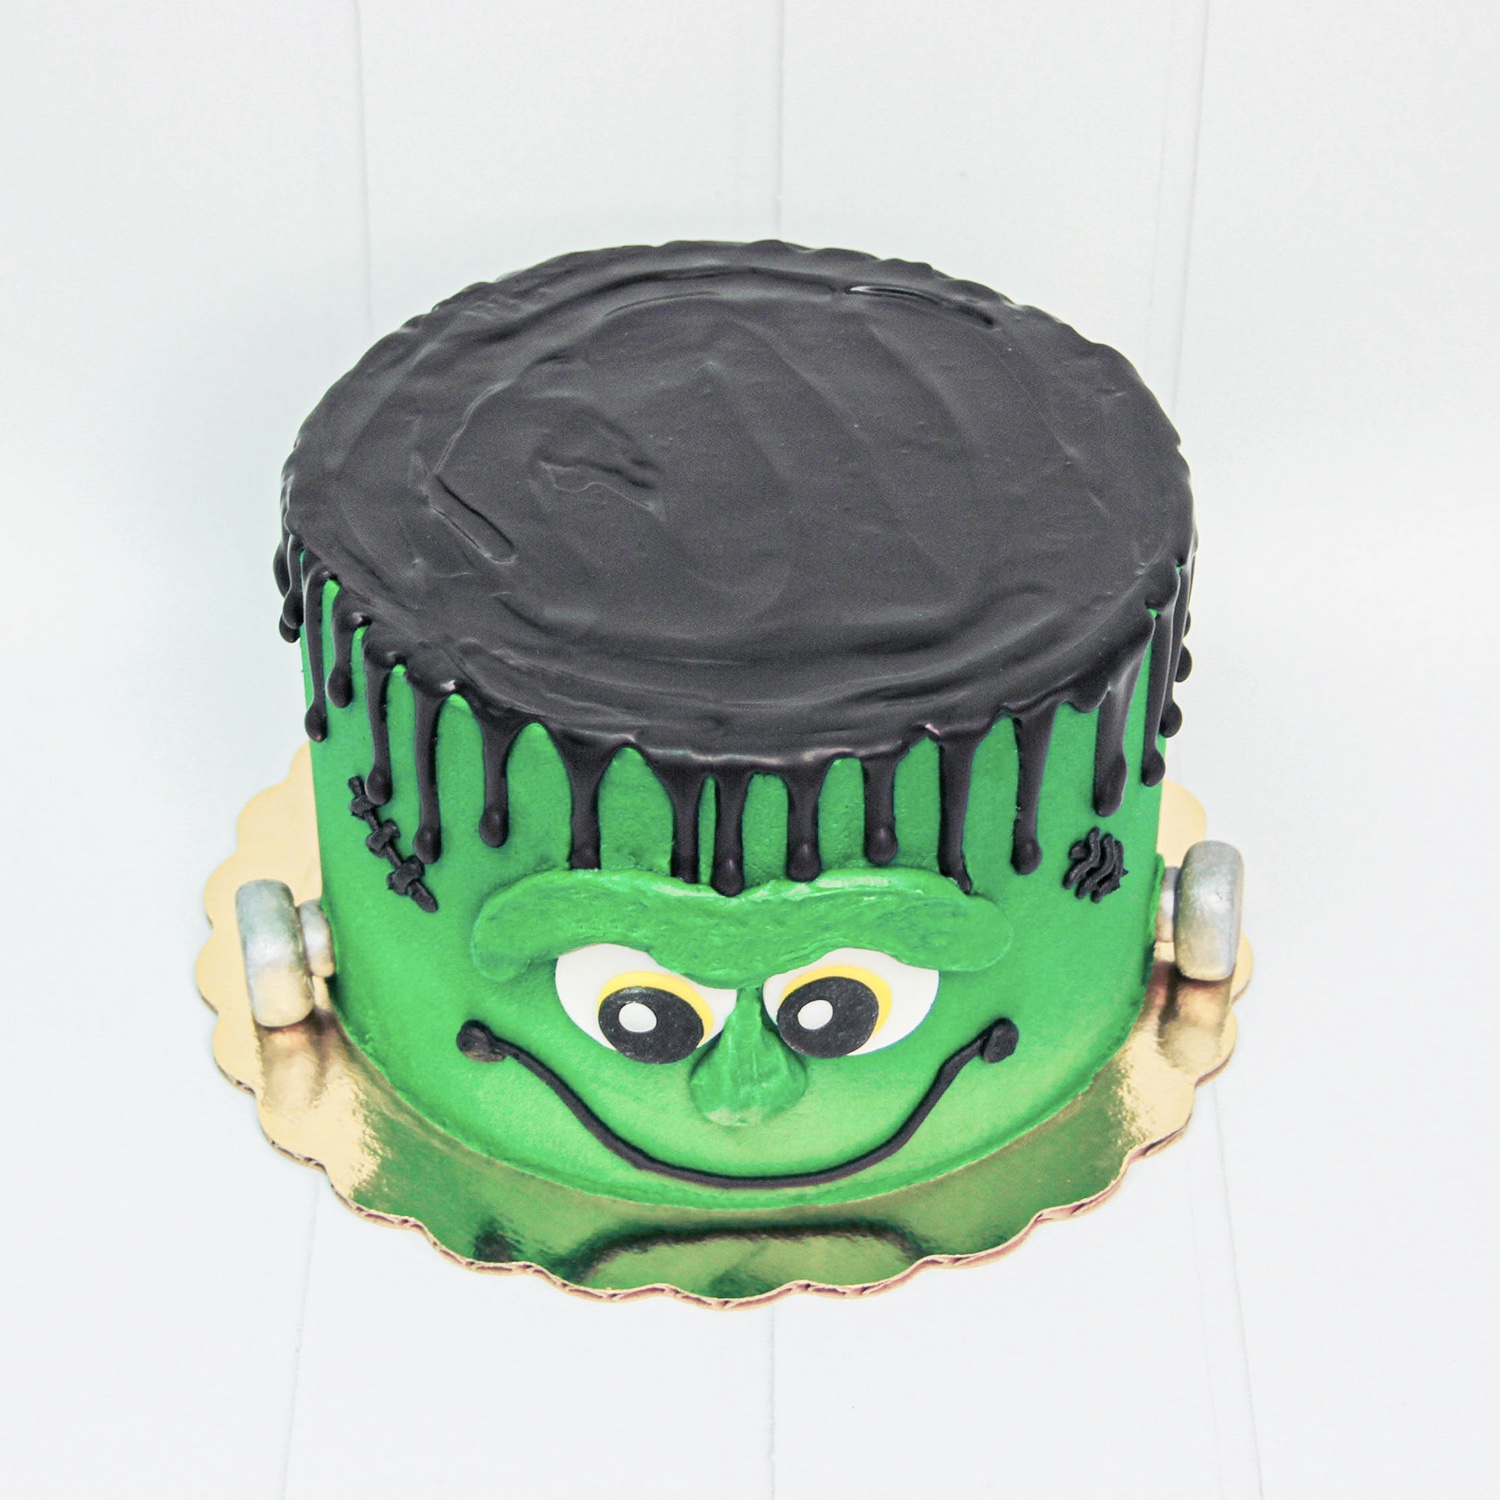 Top of frankenstein cake made in a chocolate drip.